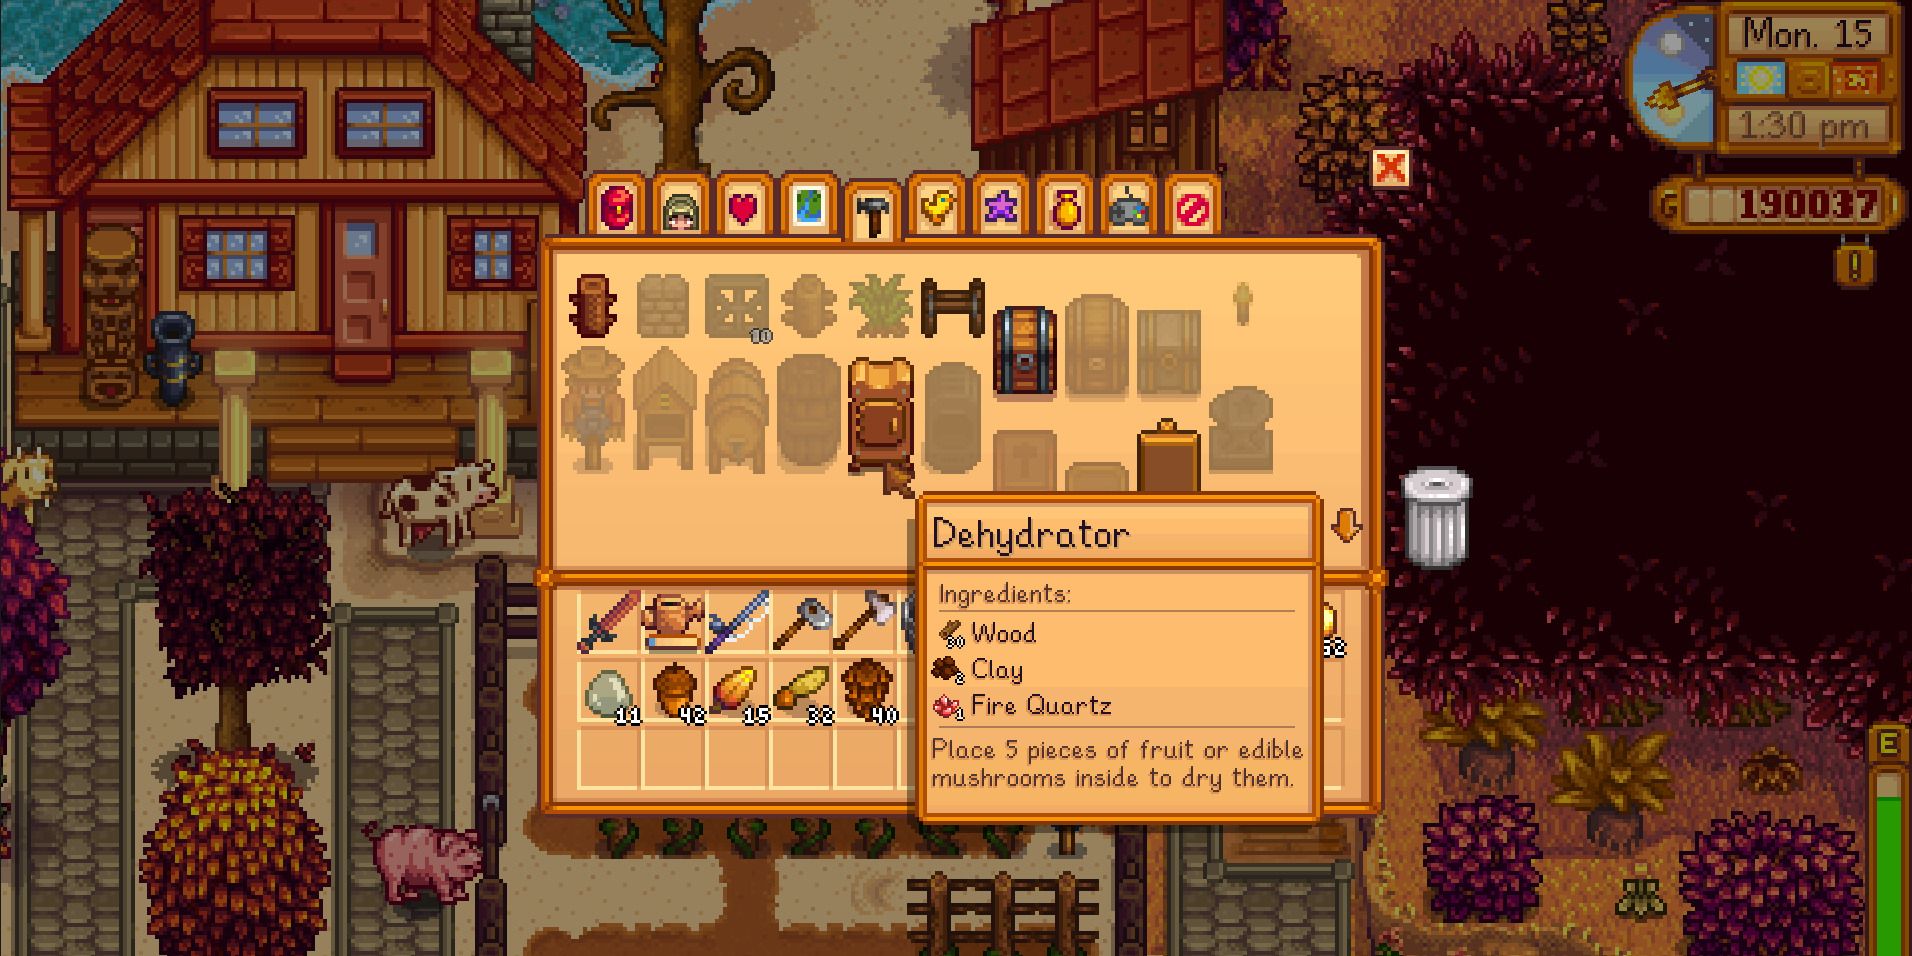 Image of the required ingredients for the dehydrator in Stardew Valley